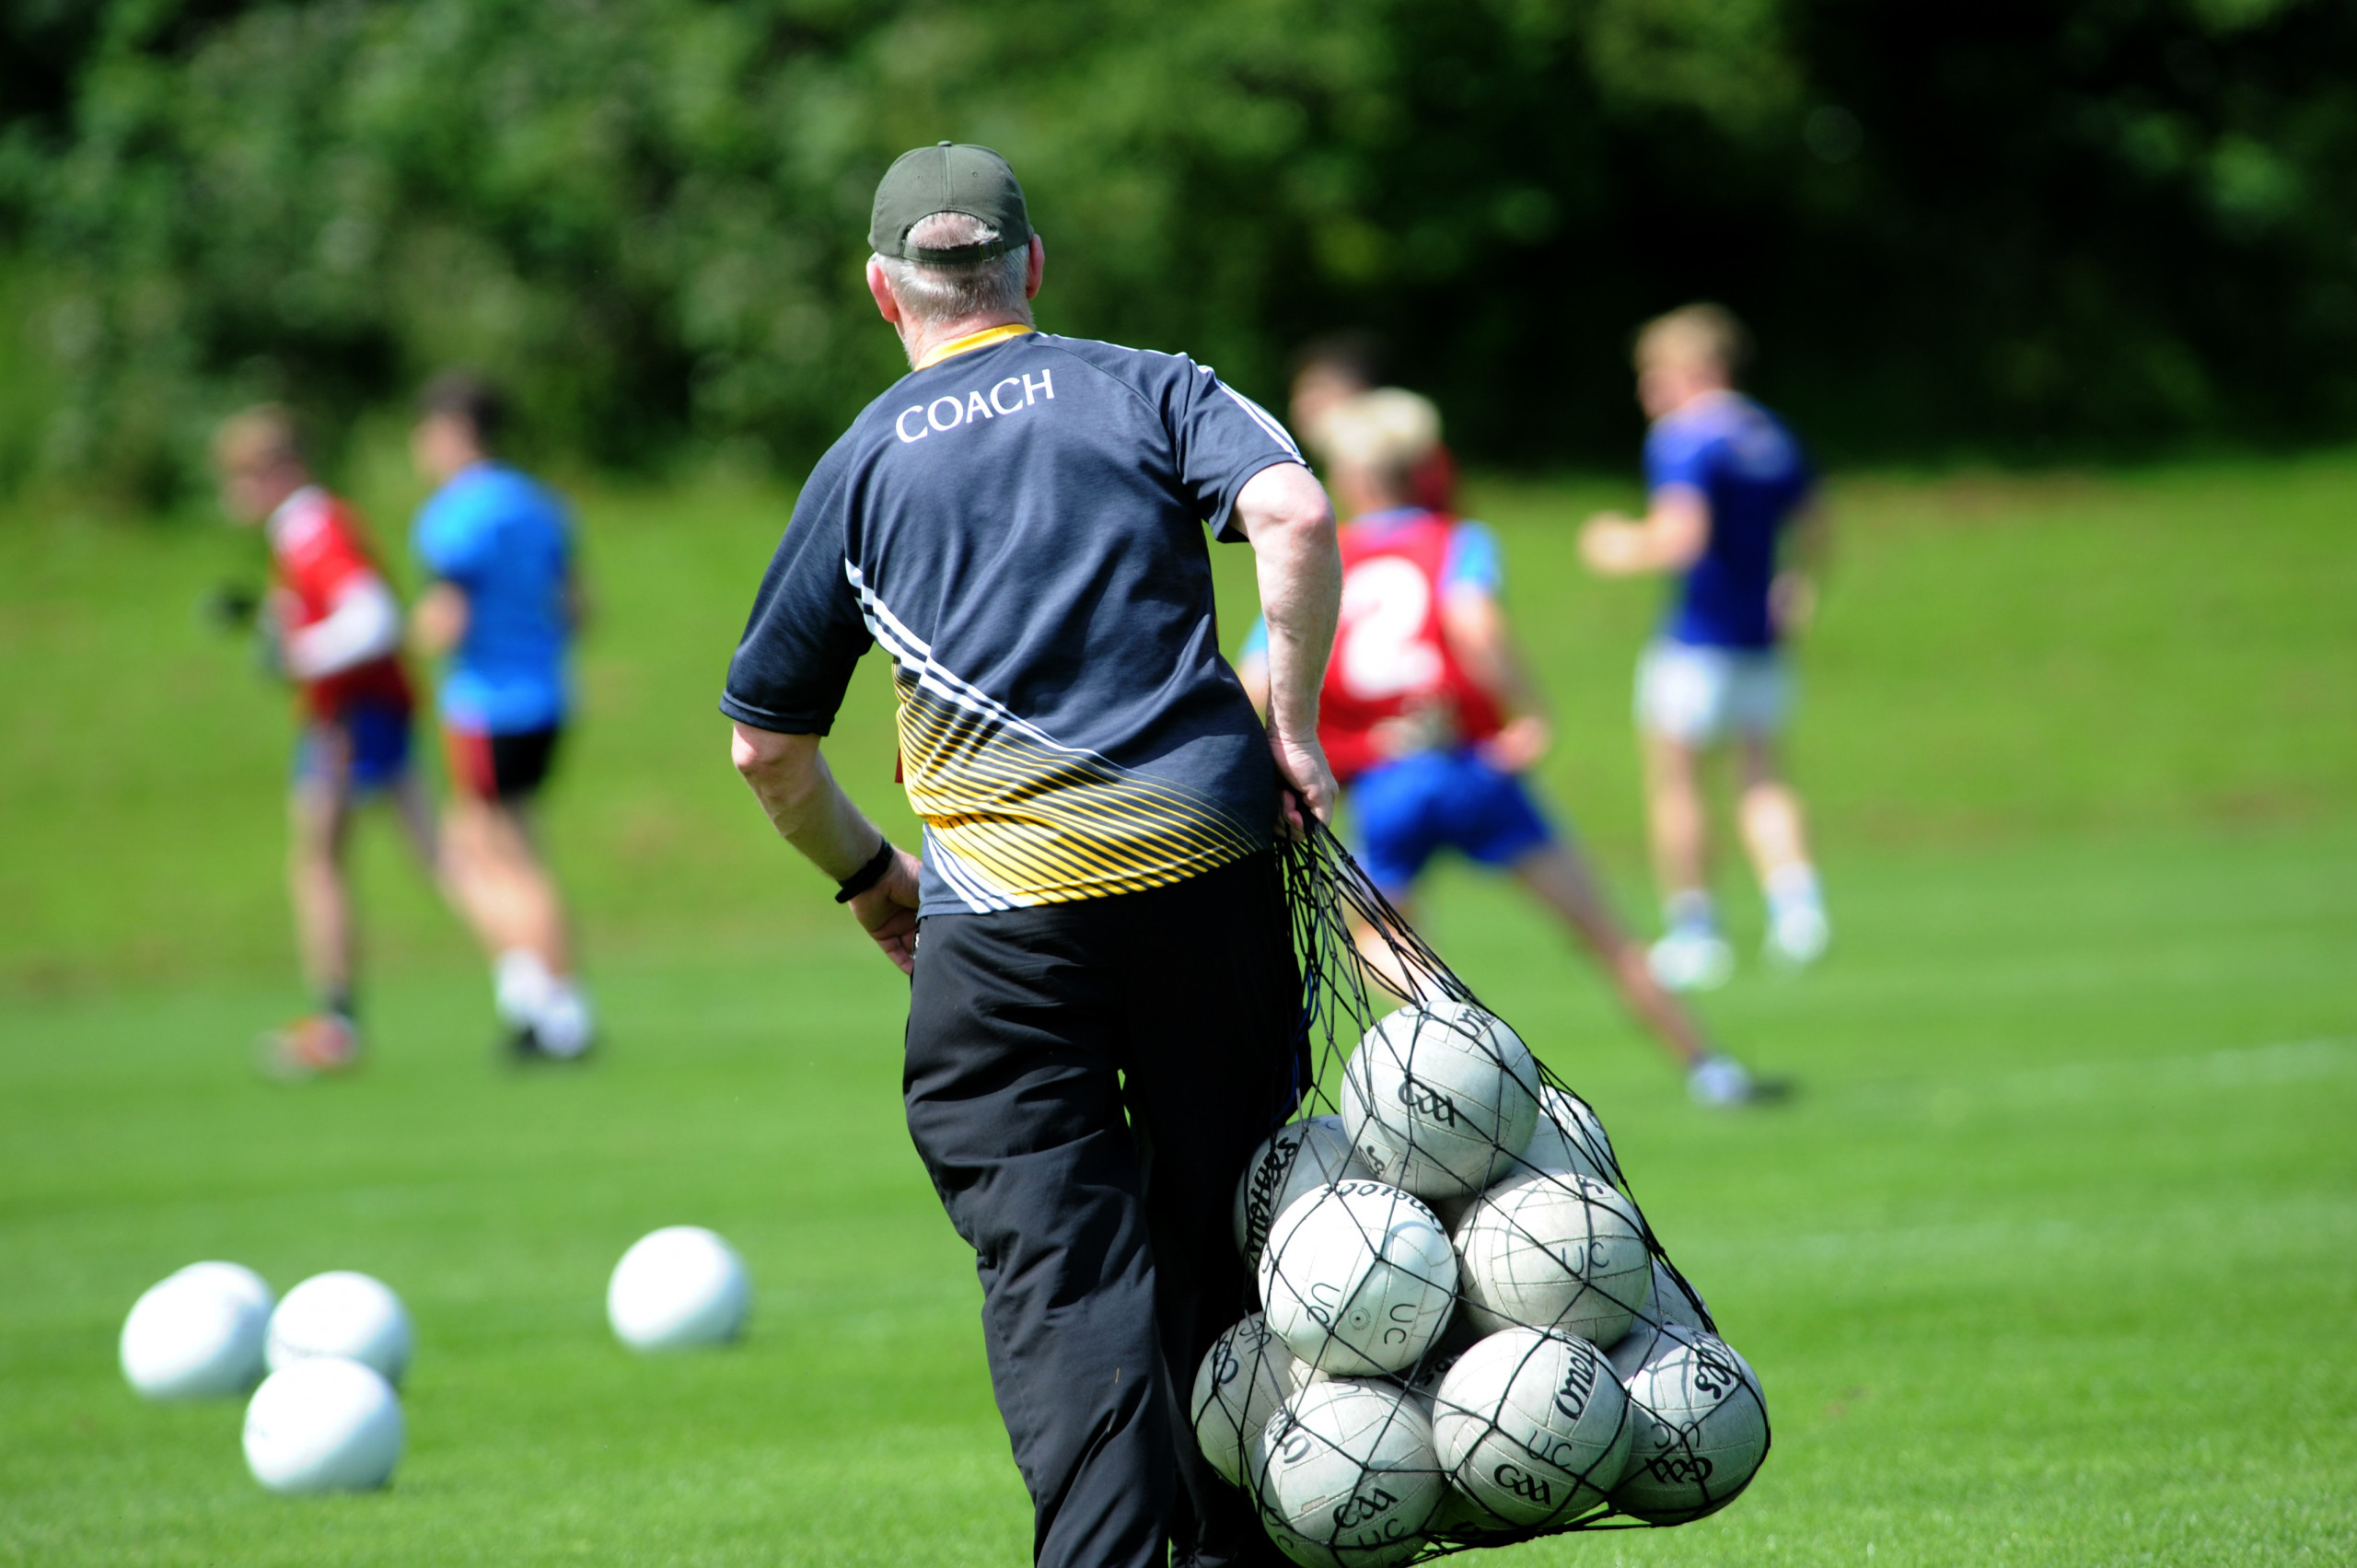 Award 2 Youth/Adult Football Course Being Delivered by Ulster GAA this September